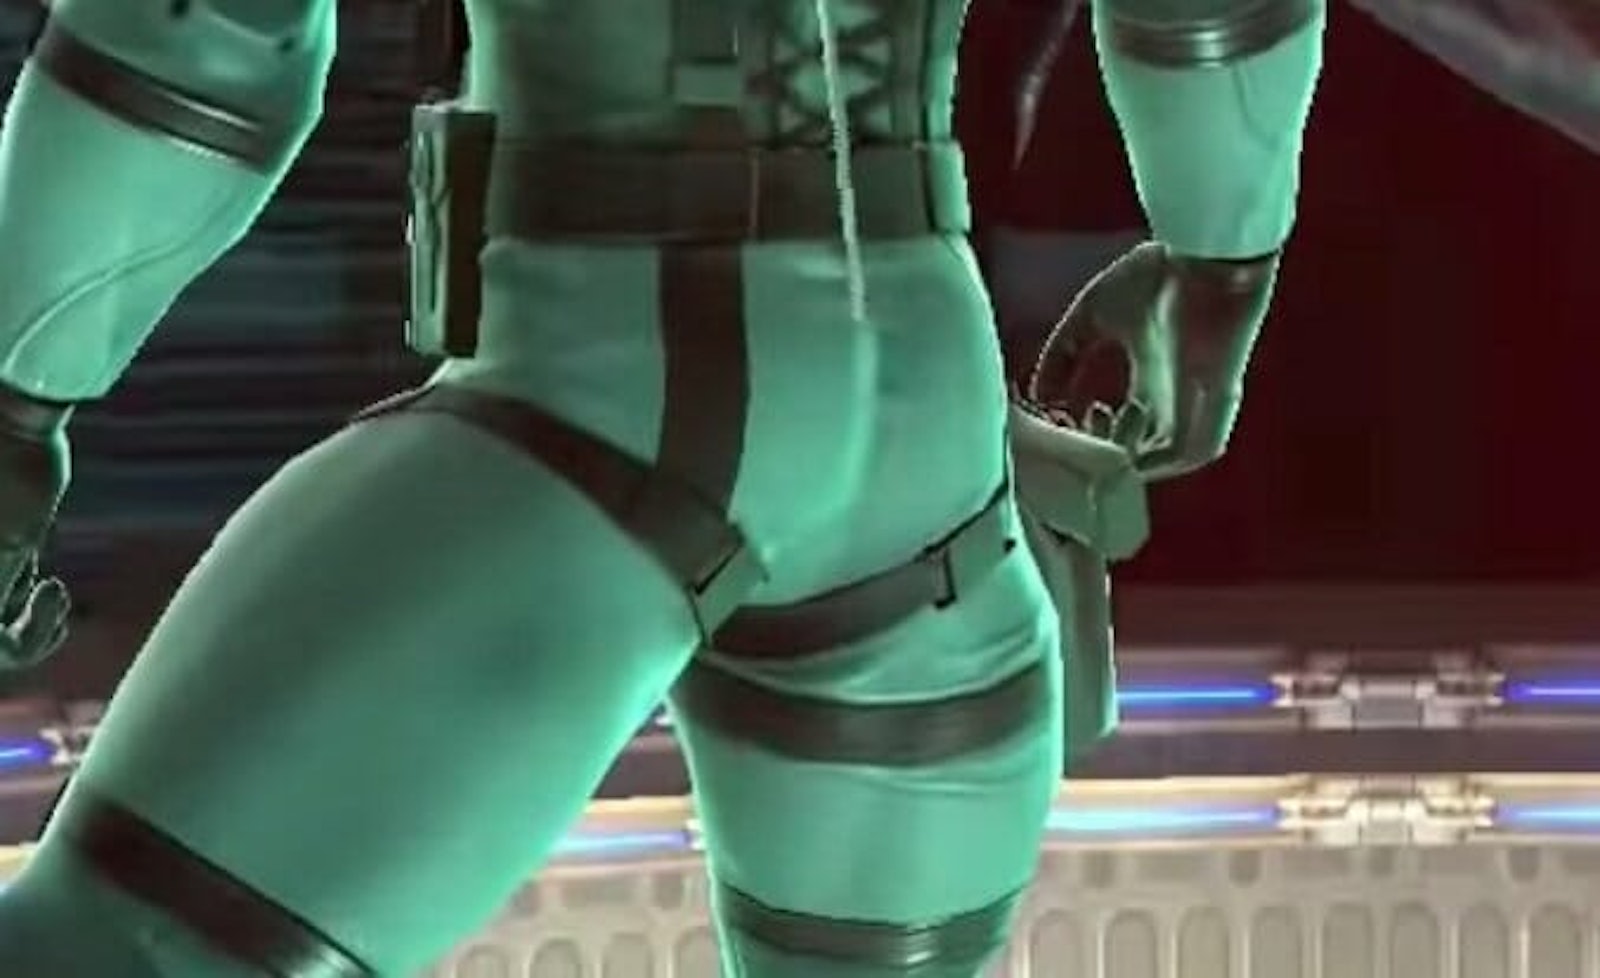 Discussion] Do you think that Samus' breasts and Snake's ass have been  purposefully nerfed in Super Smash Bros Ultimate? Or is this just a result  of a different design team with a